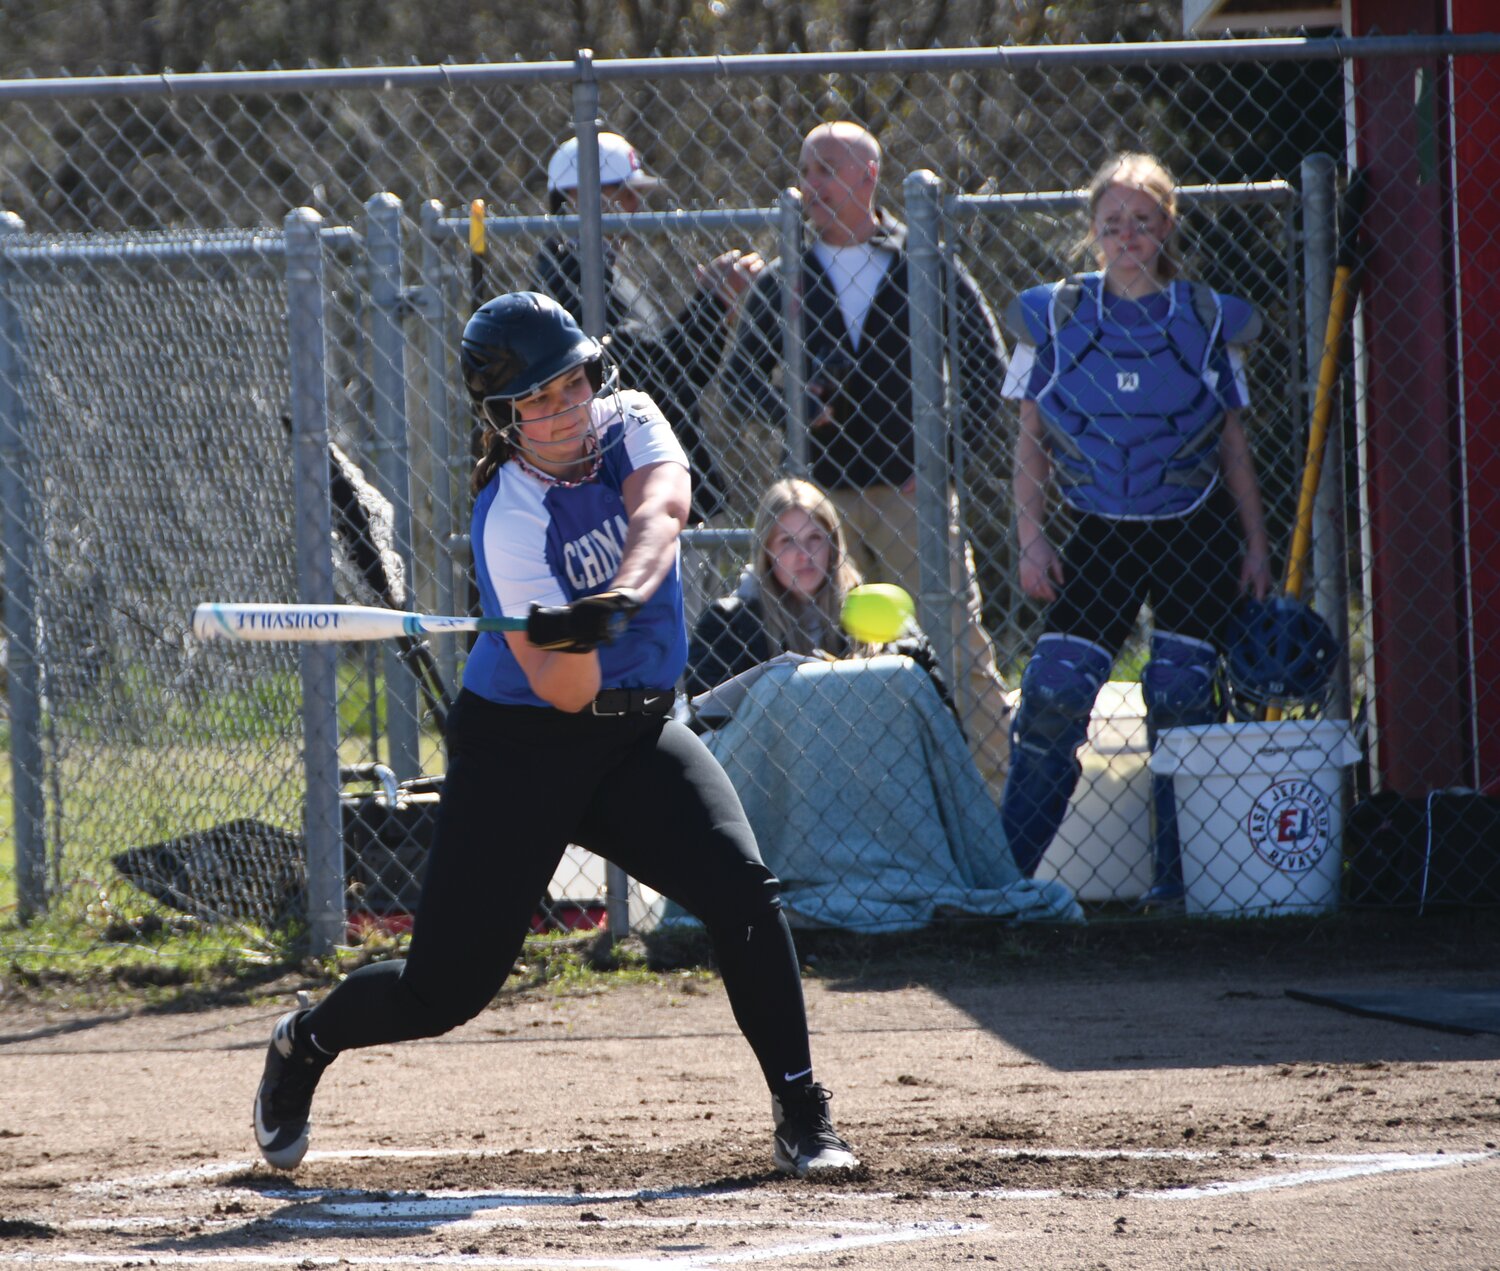 EJ third baseman Alyssa Vandenberg takes a swing at a pitch during the Rivals’ matchup against Cascade Christian School last week.